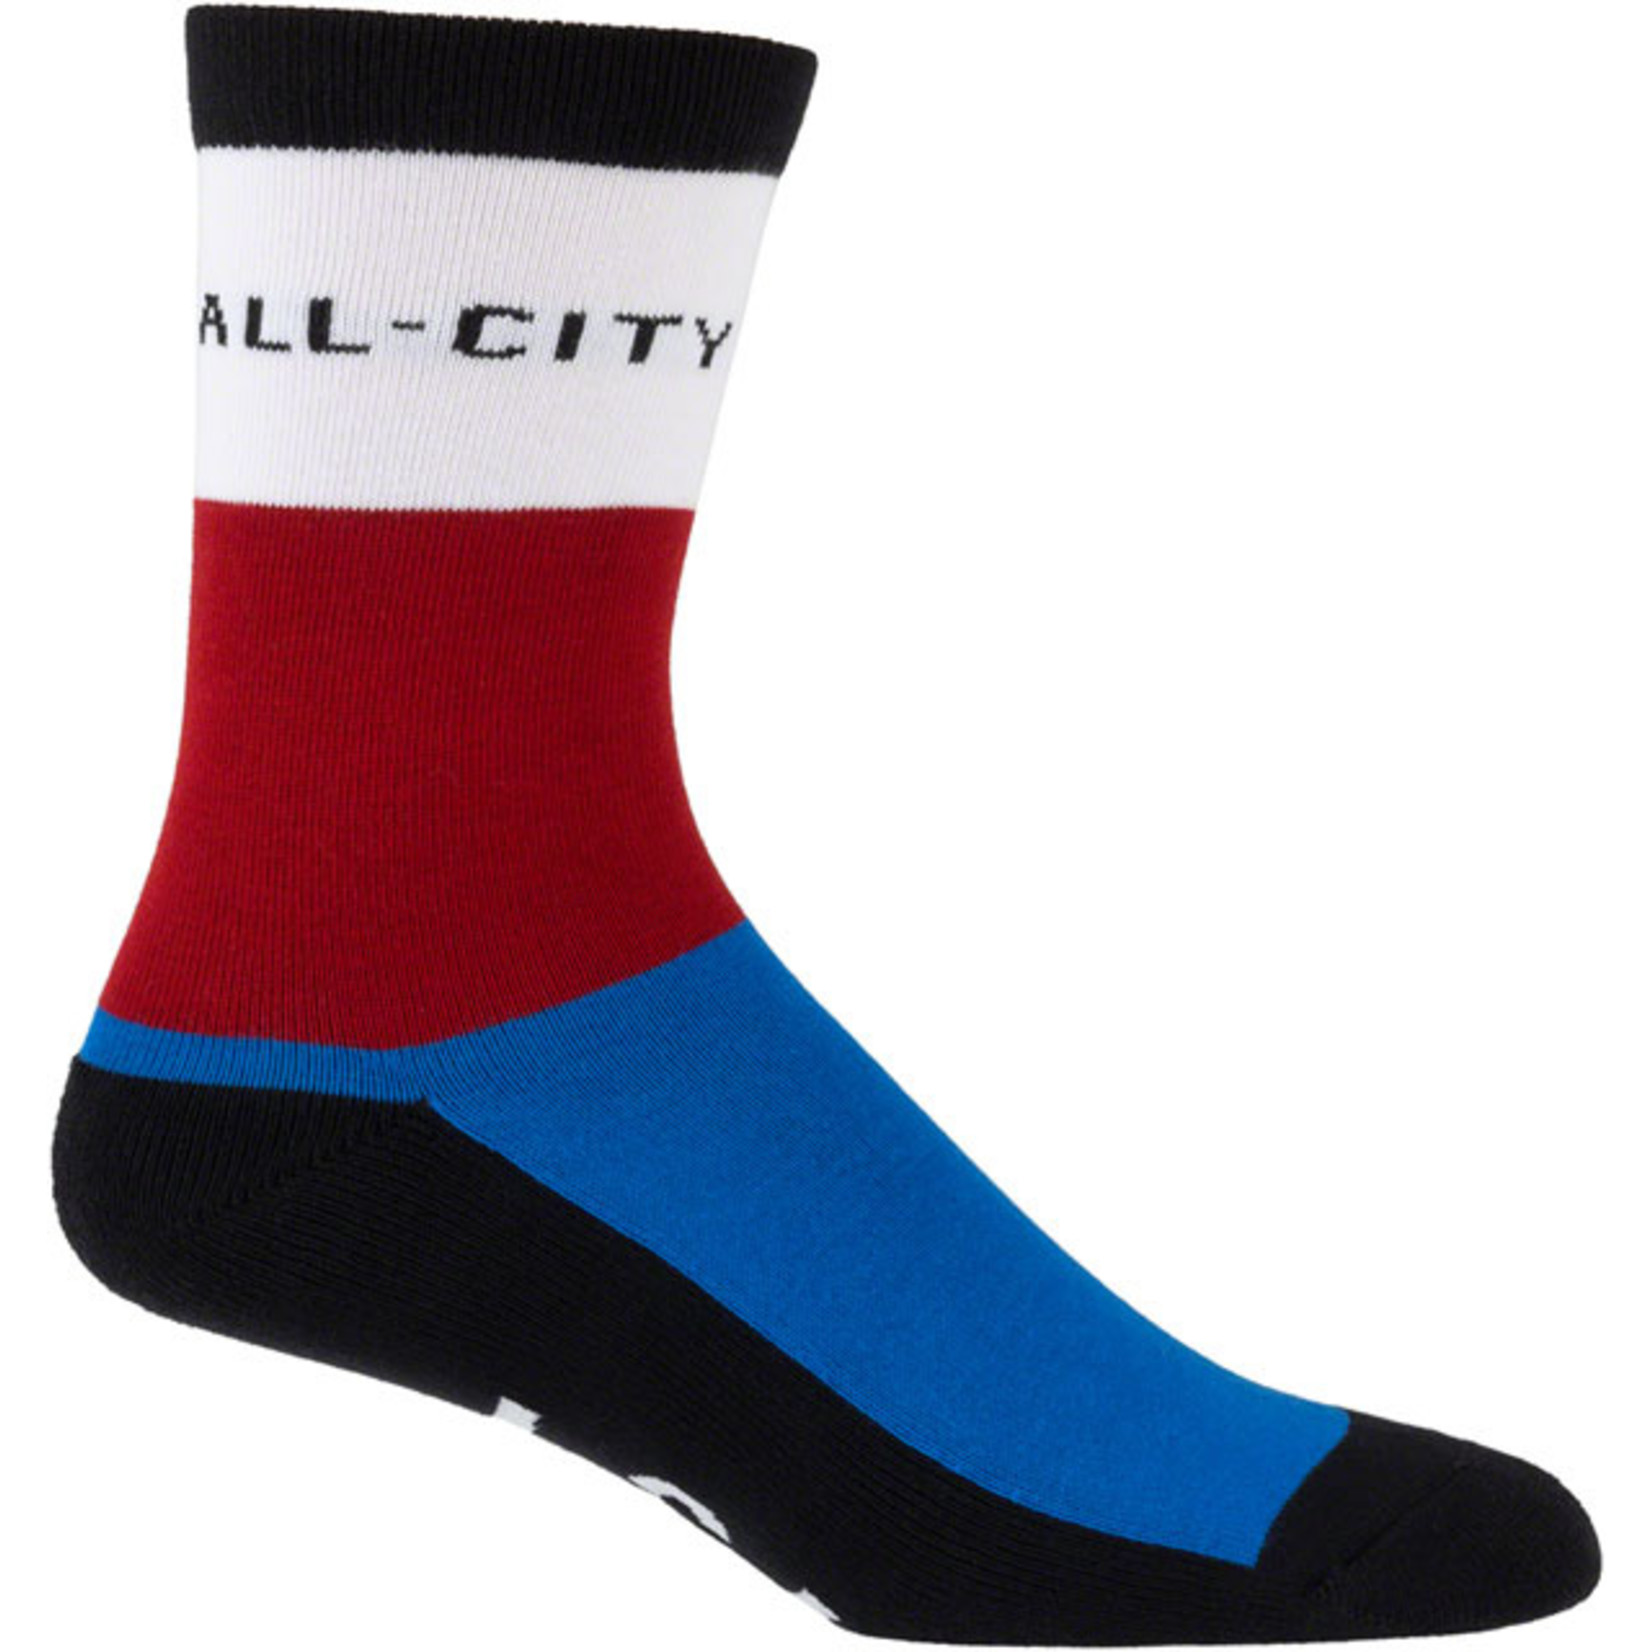 All-City All-City Parthenon Party Sock - White, Red, Blue, Black, Large/X-Large